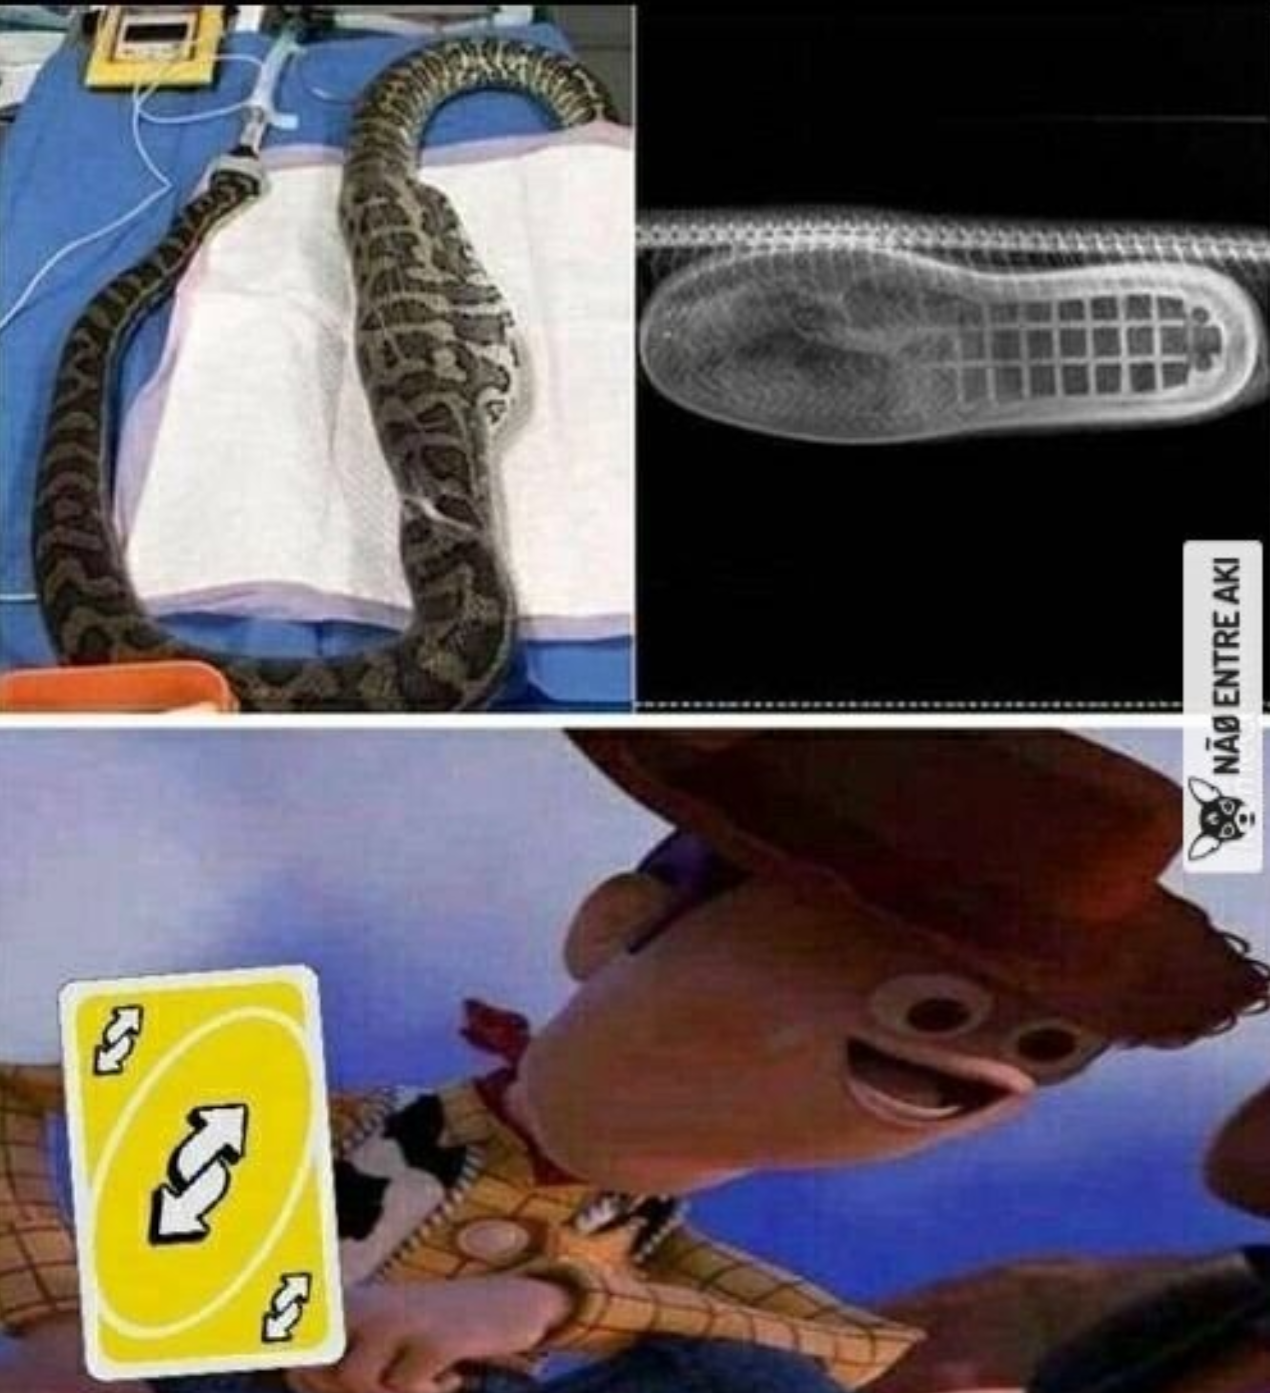 Theres a boot in my snake